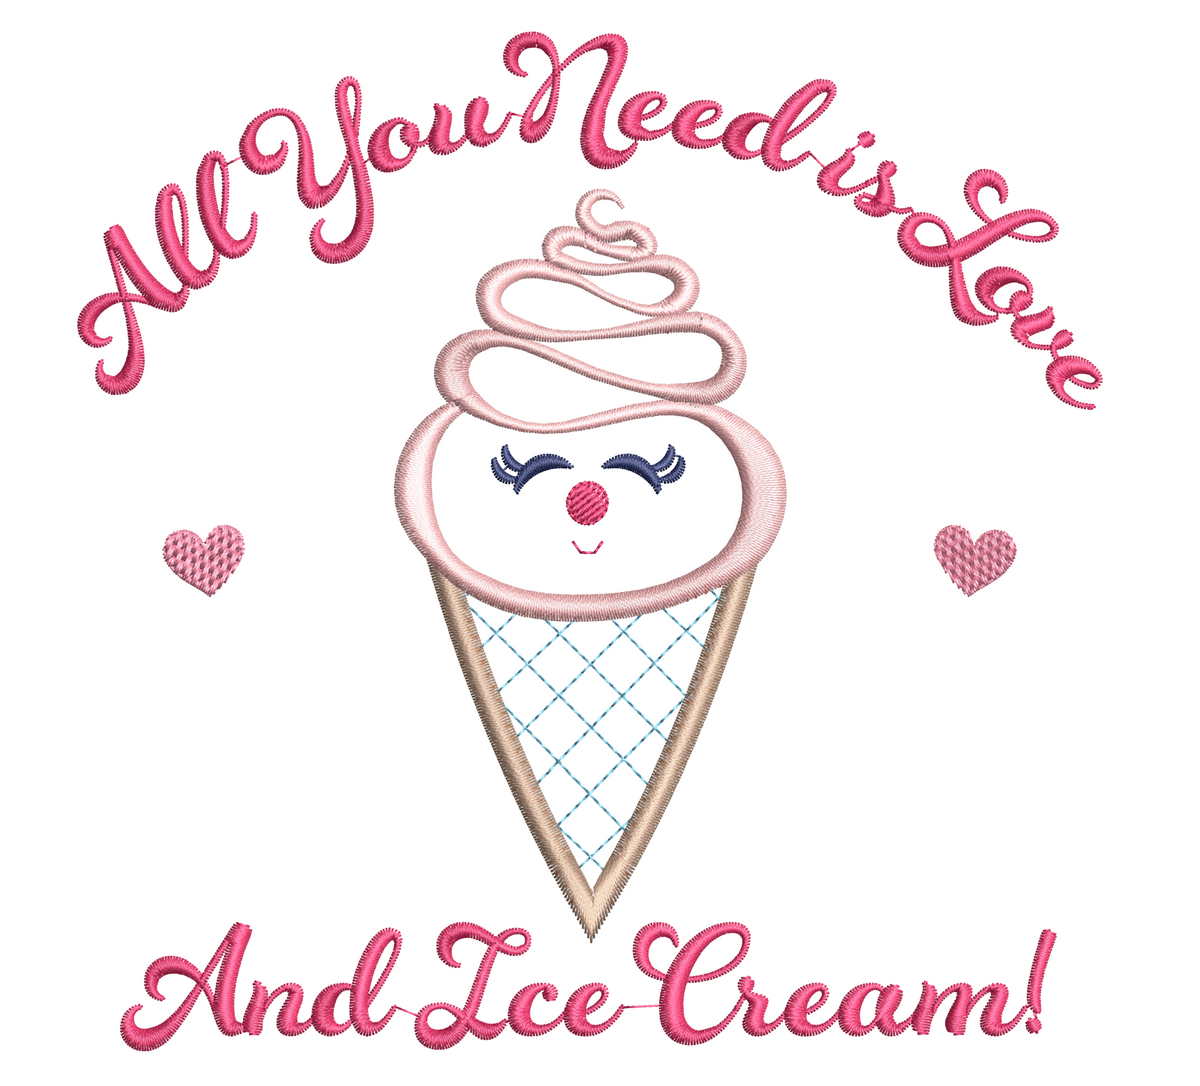 All You Need is Ice Cream Applique Set